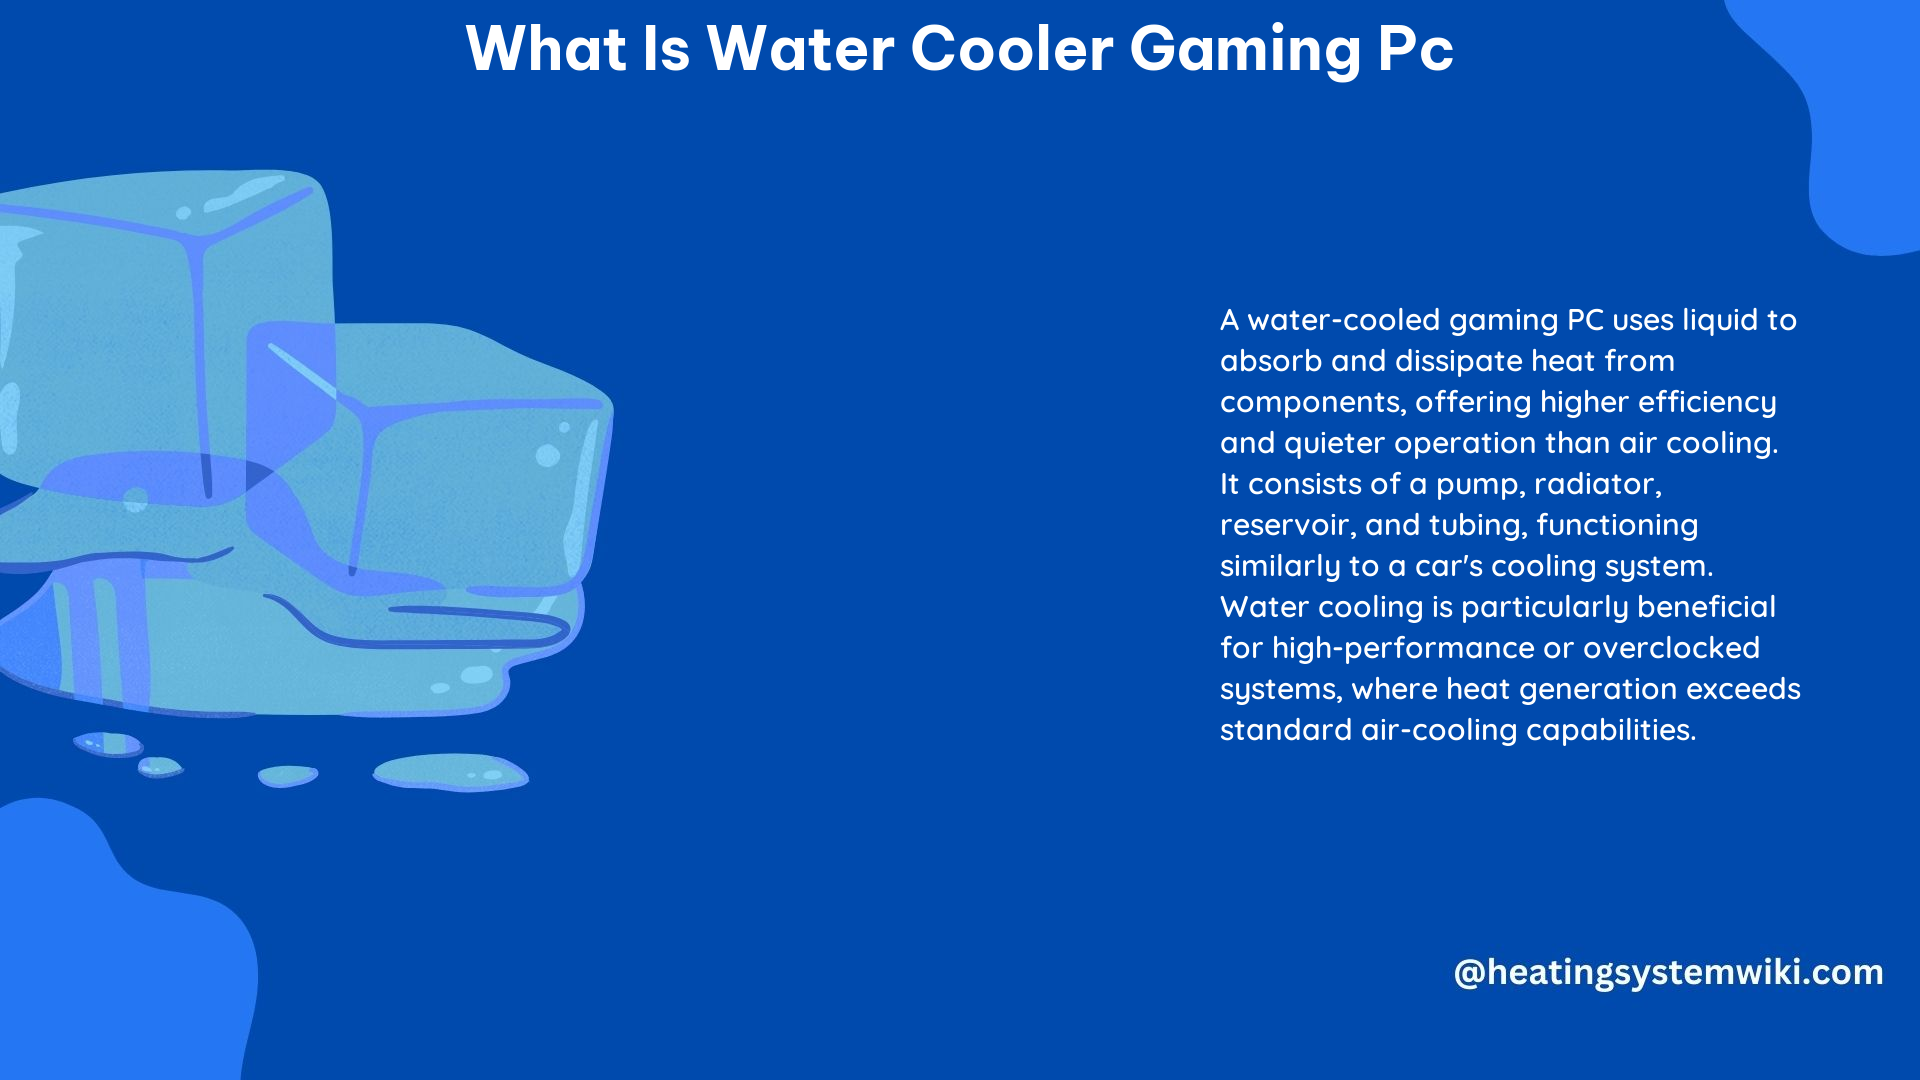 What Is Water Cooler Gaming PC